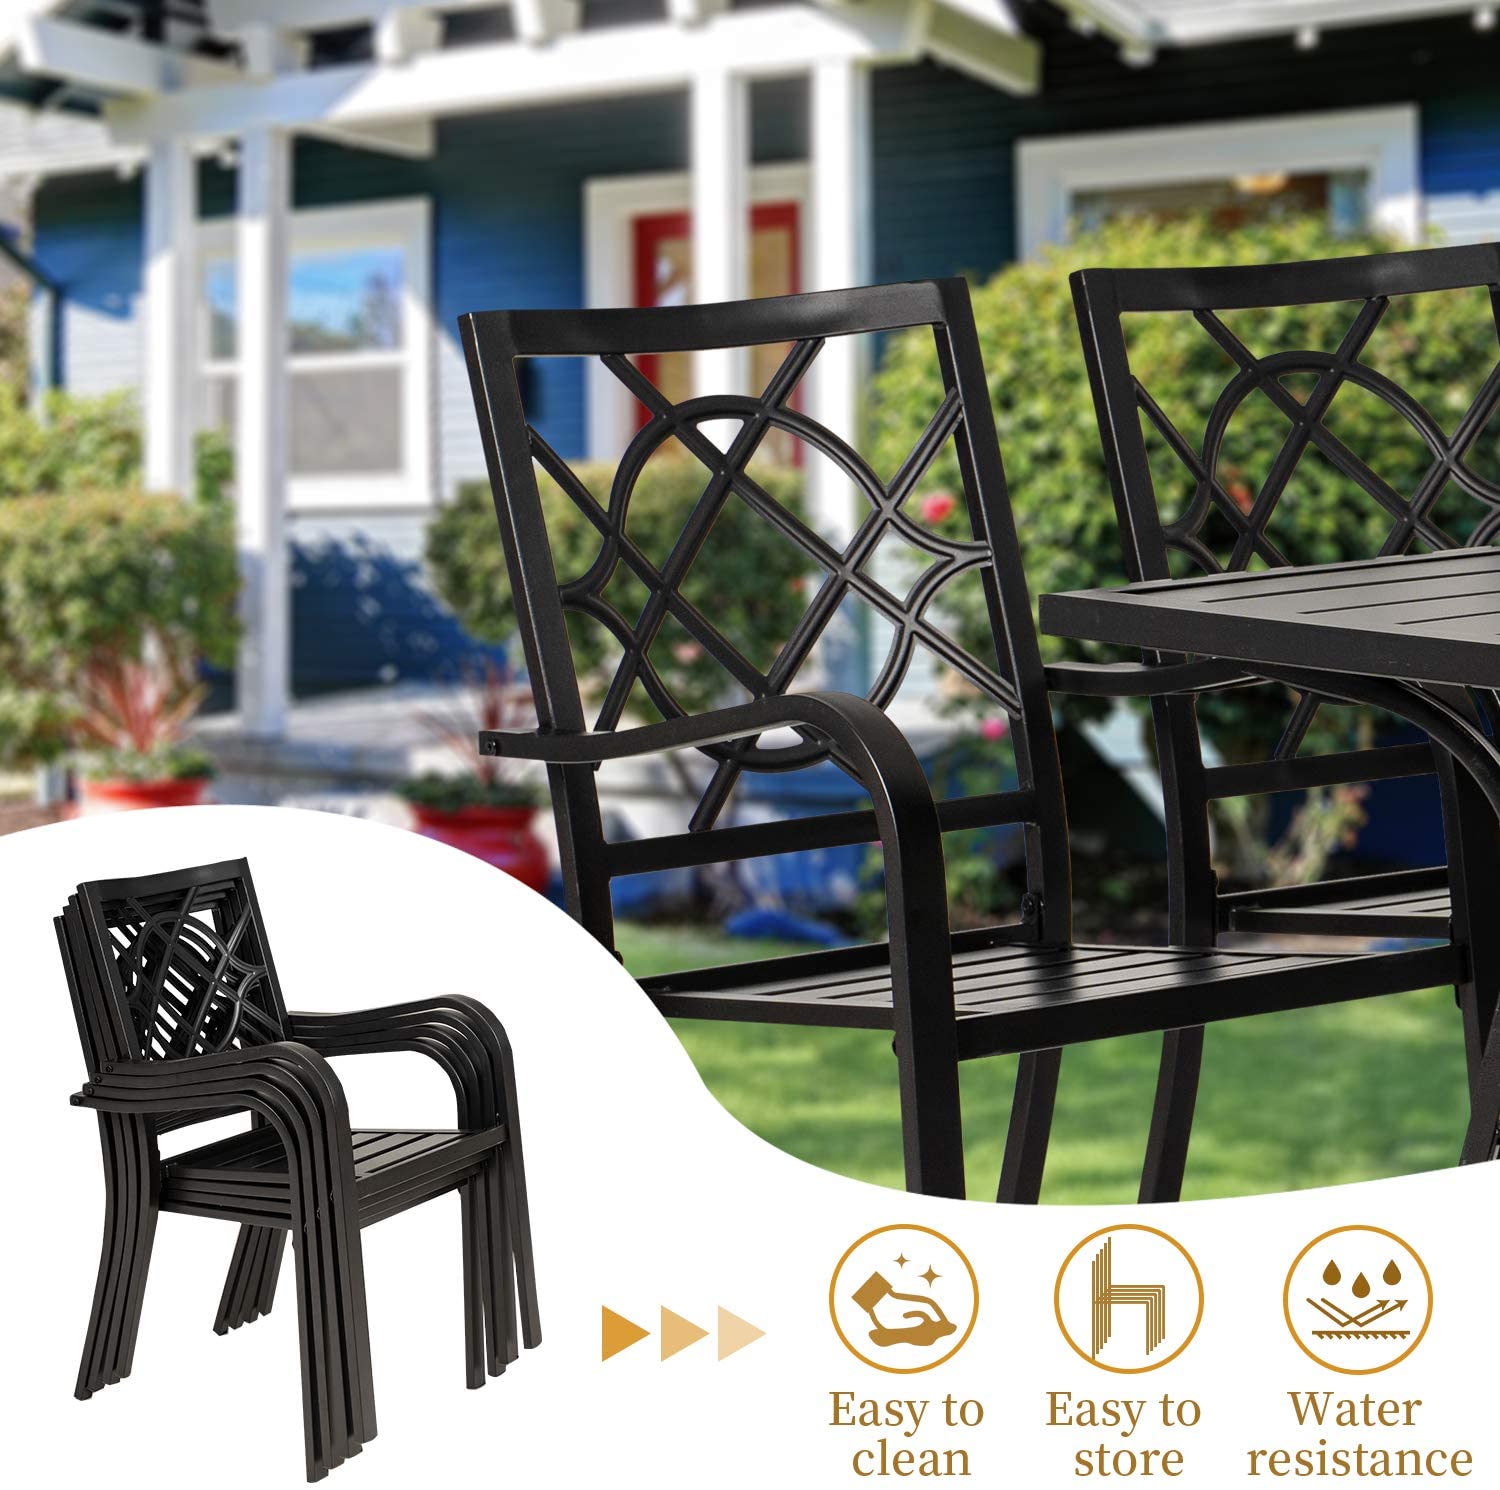 SOLAURA Outdoor Patio Stackable Wrought Iron Dining Chairs Set of 4- Black - image 3 of 7